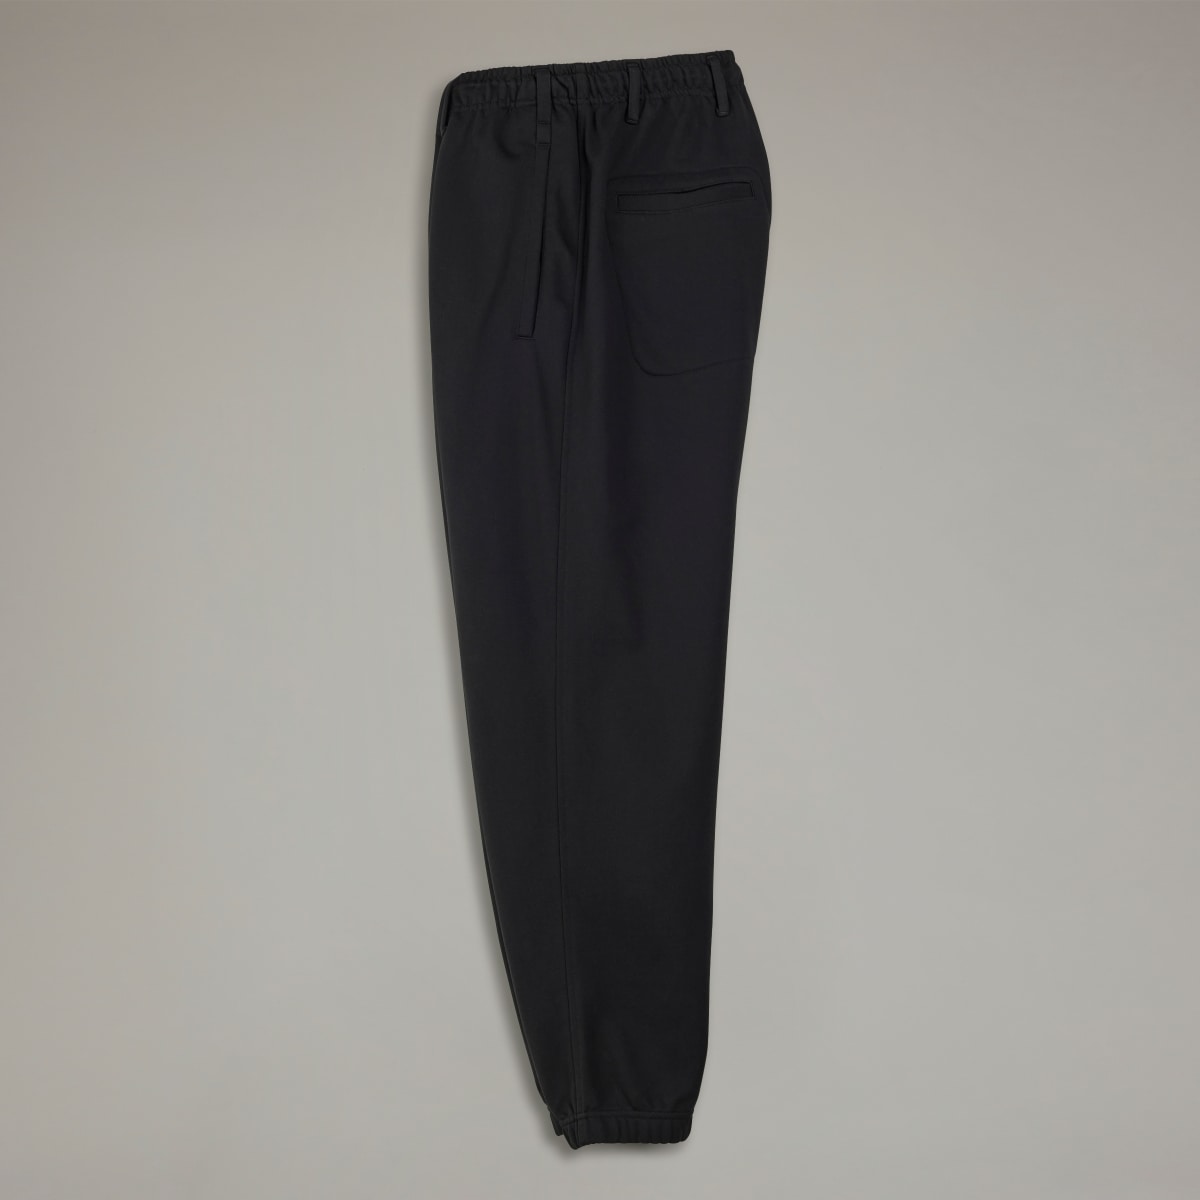 Adidas Y-3 French Terry Track Pants. 5